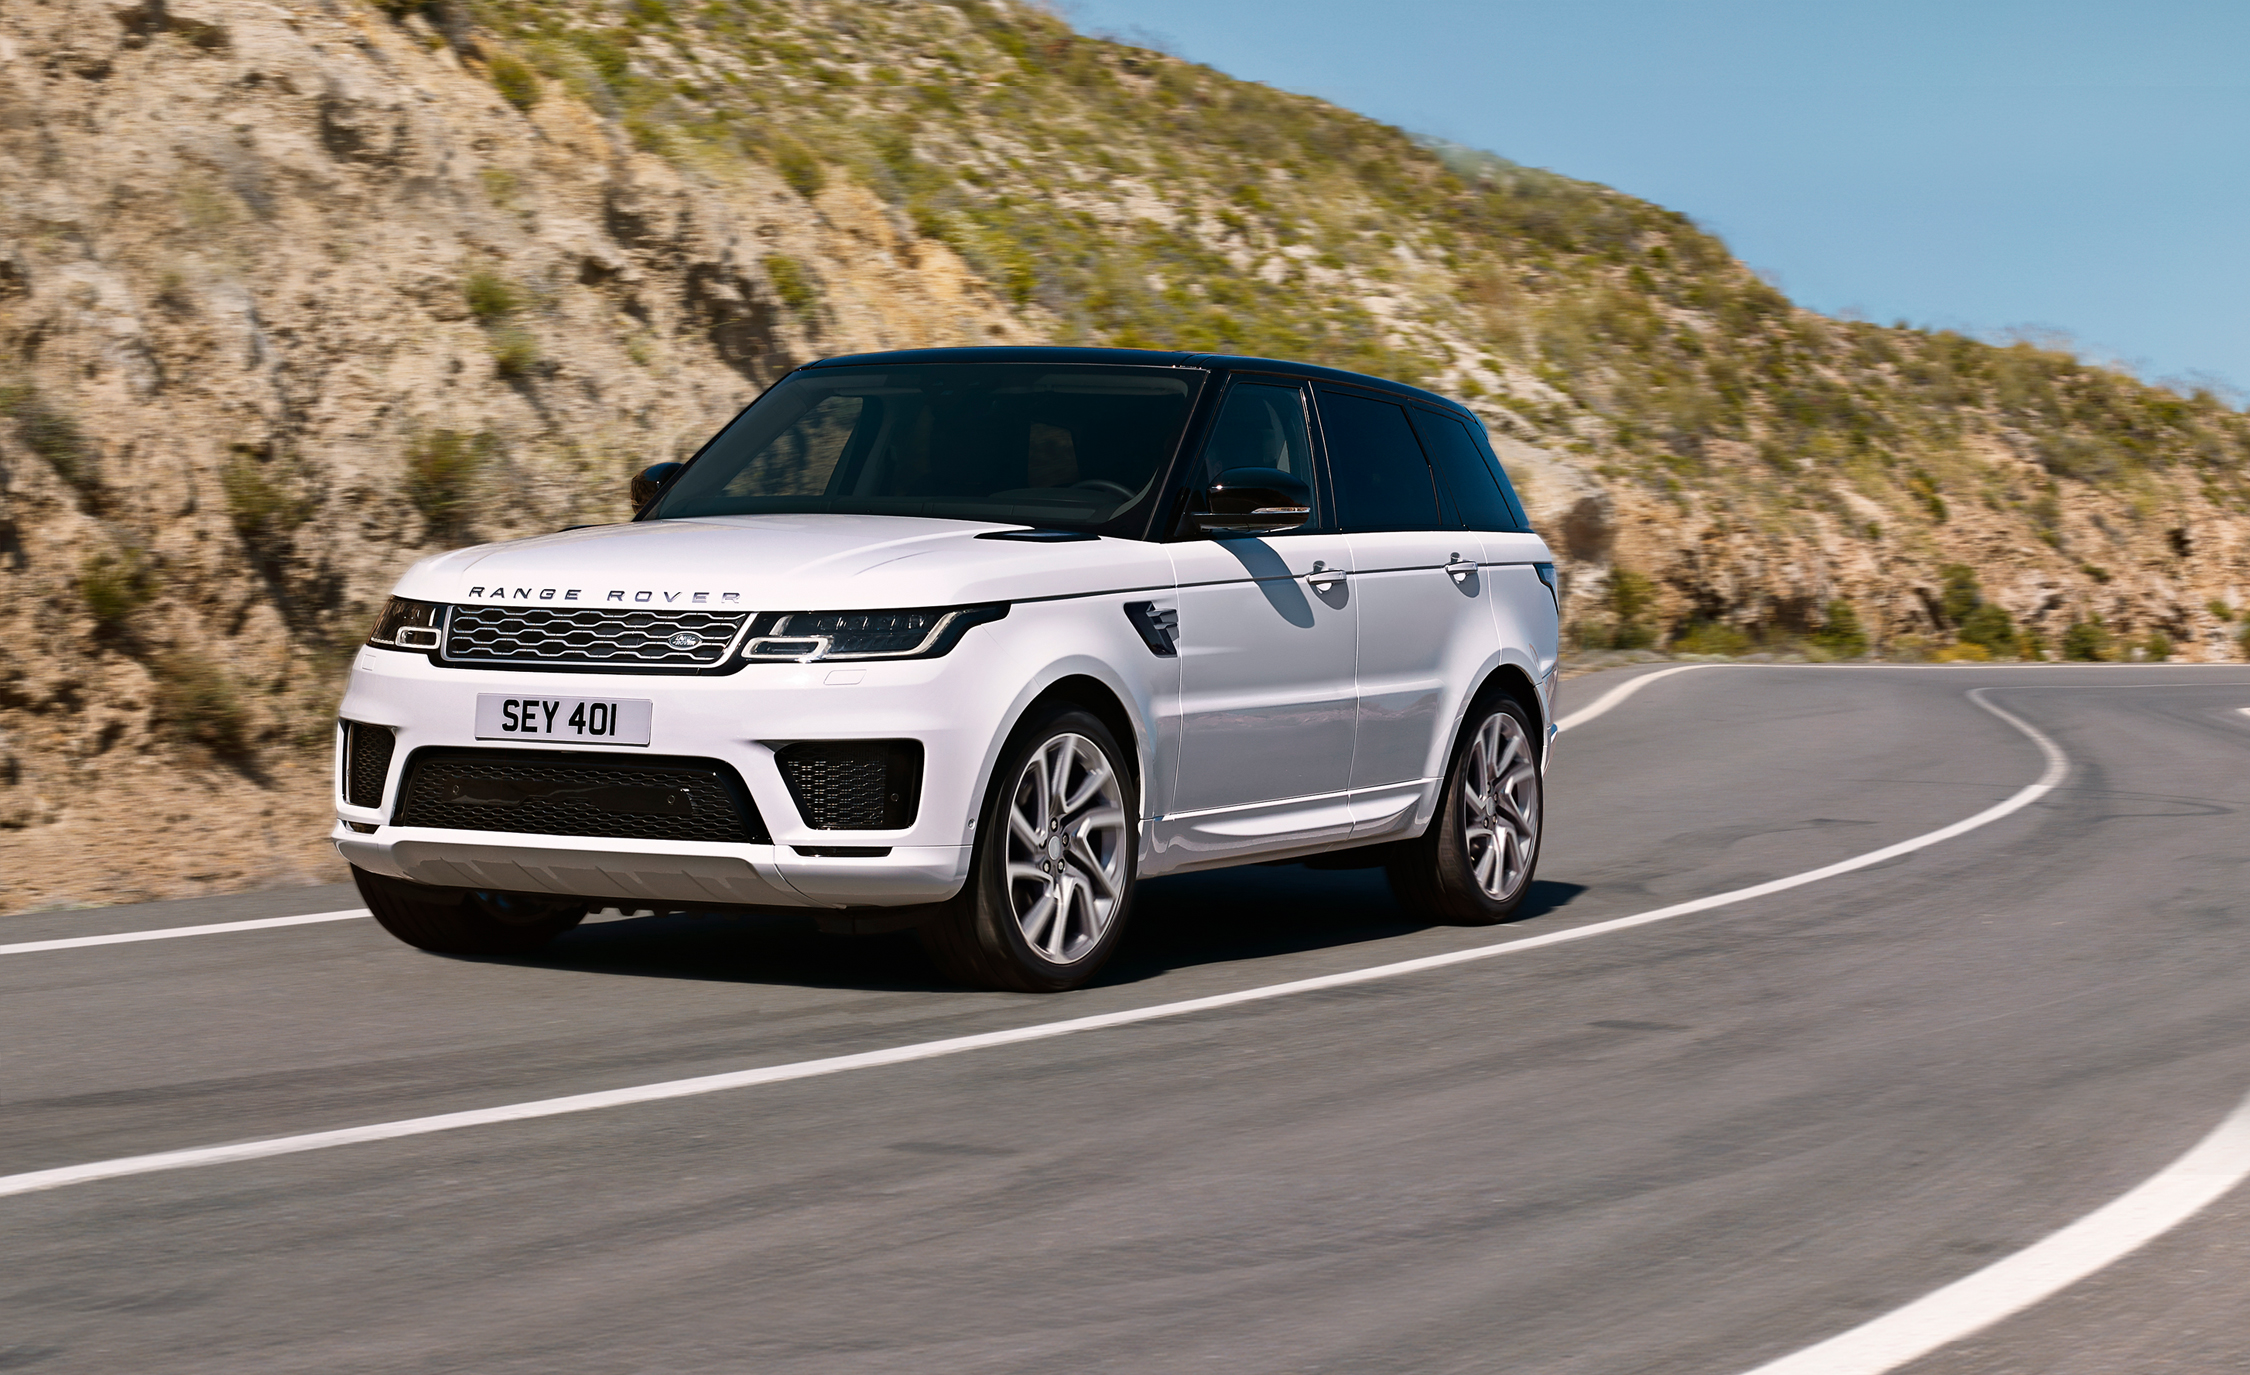 2016 Range Rover Sport SVR Tested on Performance Tires | Review ...